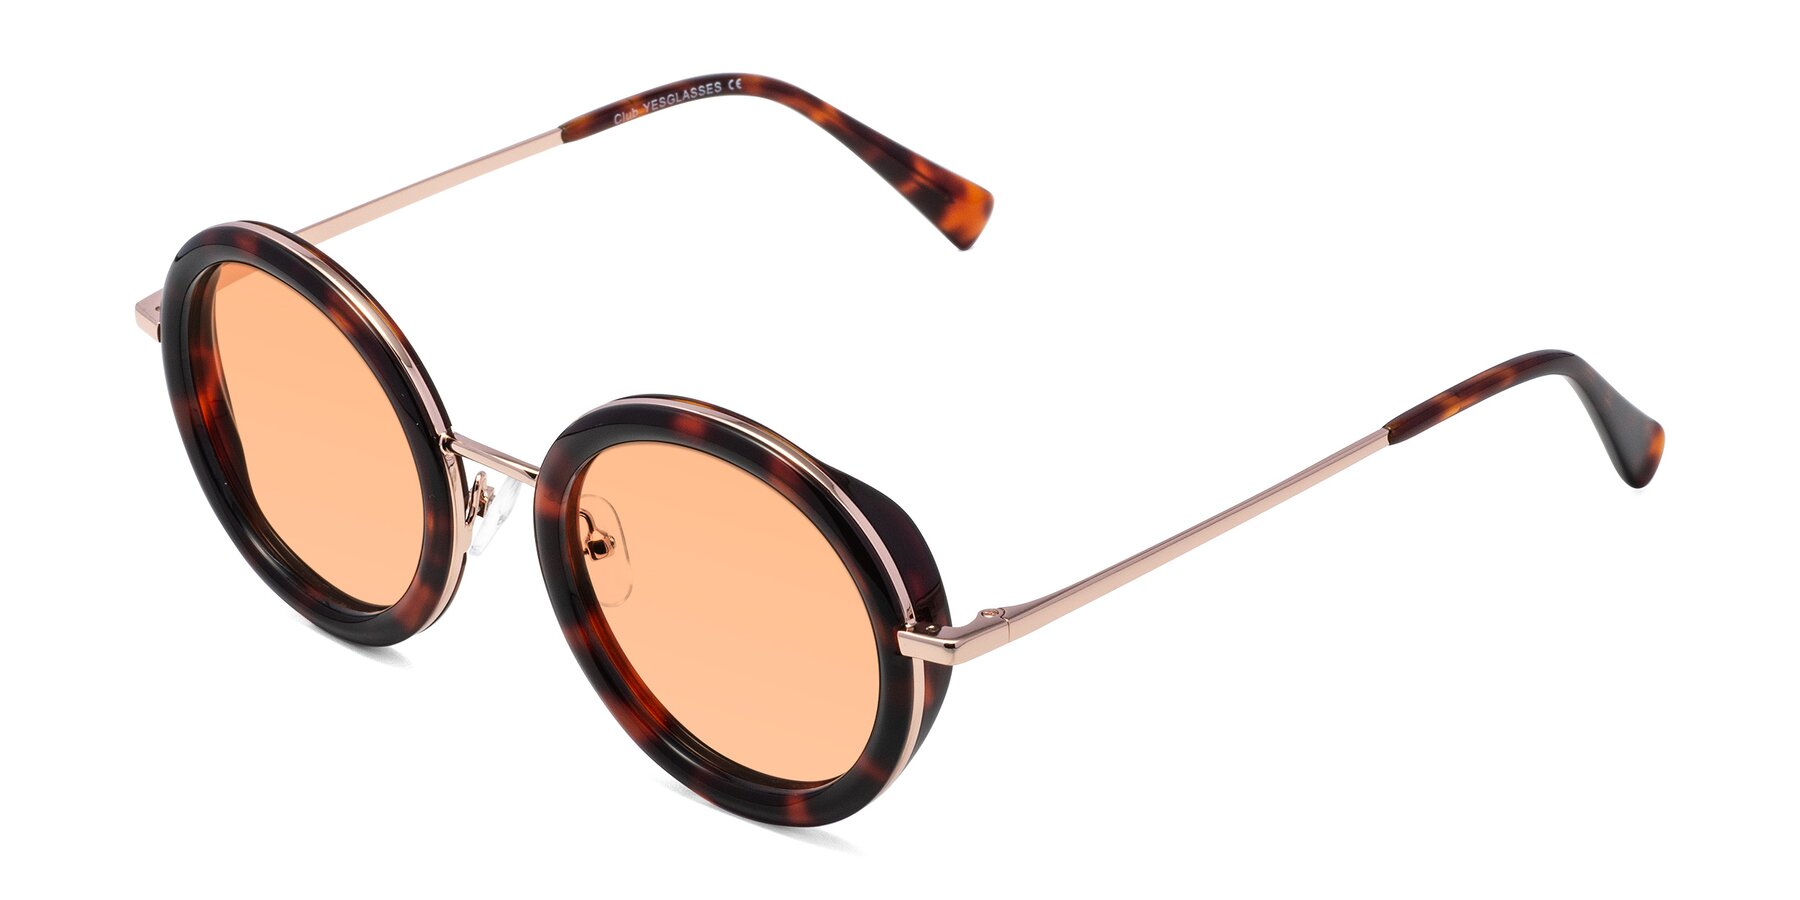 Angle of Club in Tortoise-Rose Gold with Light Orange Tinted Lenses